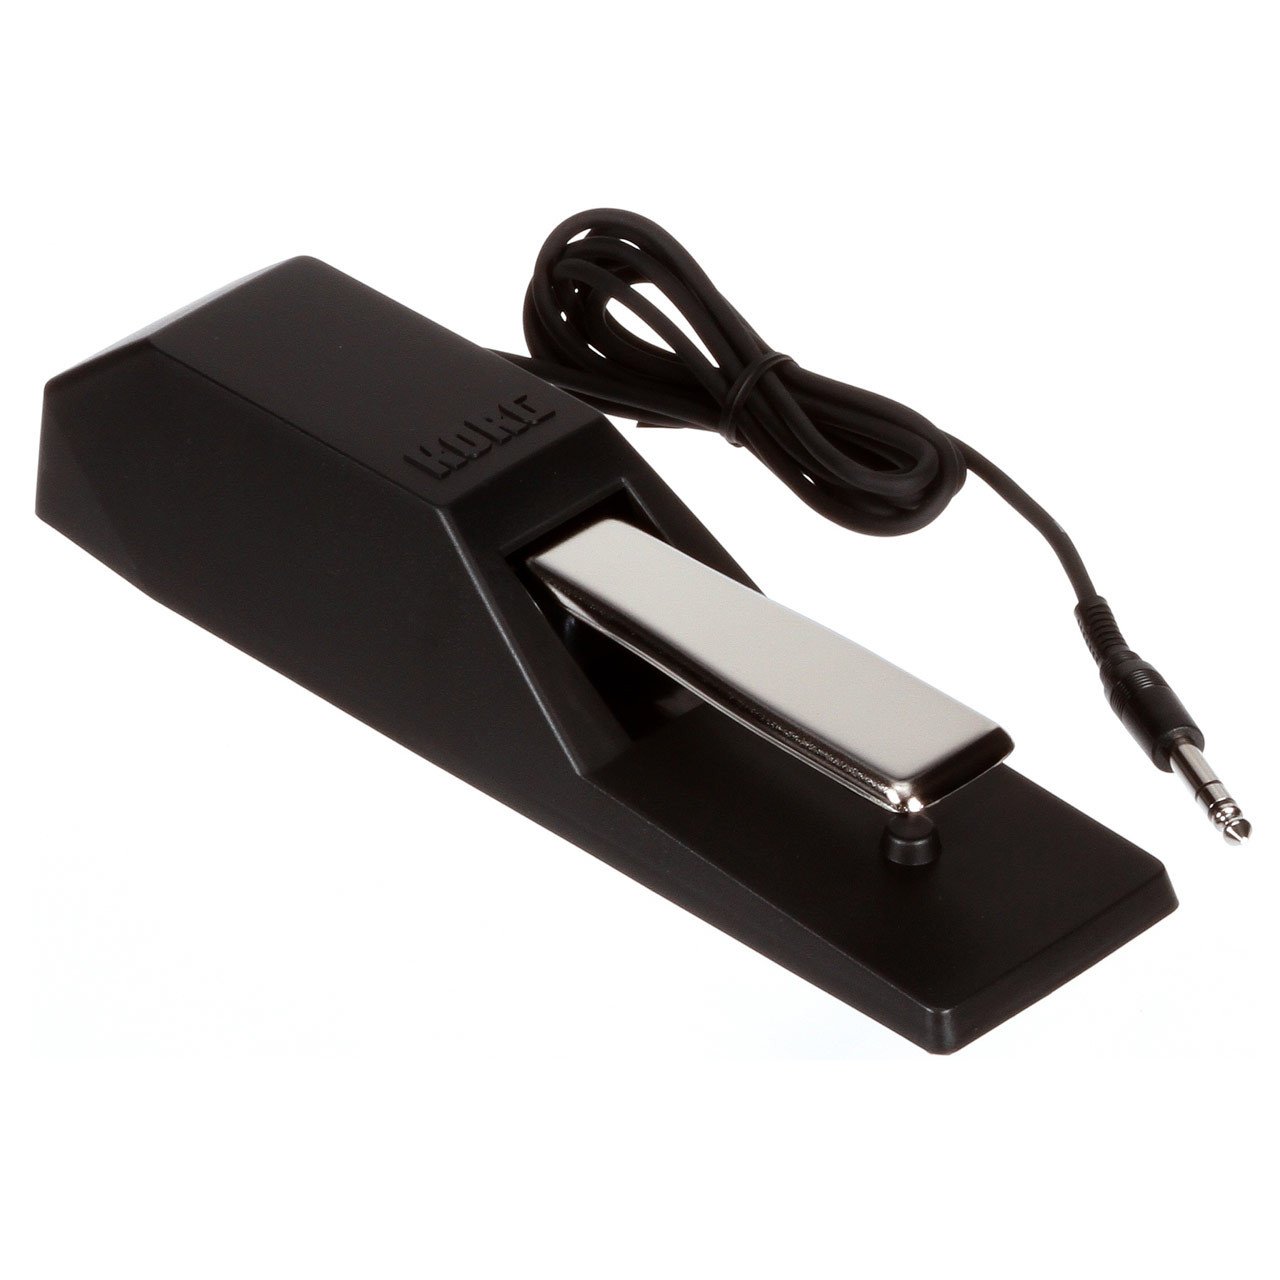 Keyboard Accessories - Korg DS1H (DS-1H) Piano Half Damper Sustain Pedal